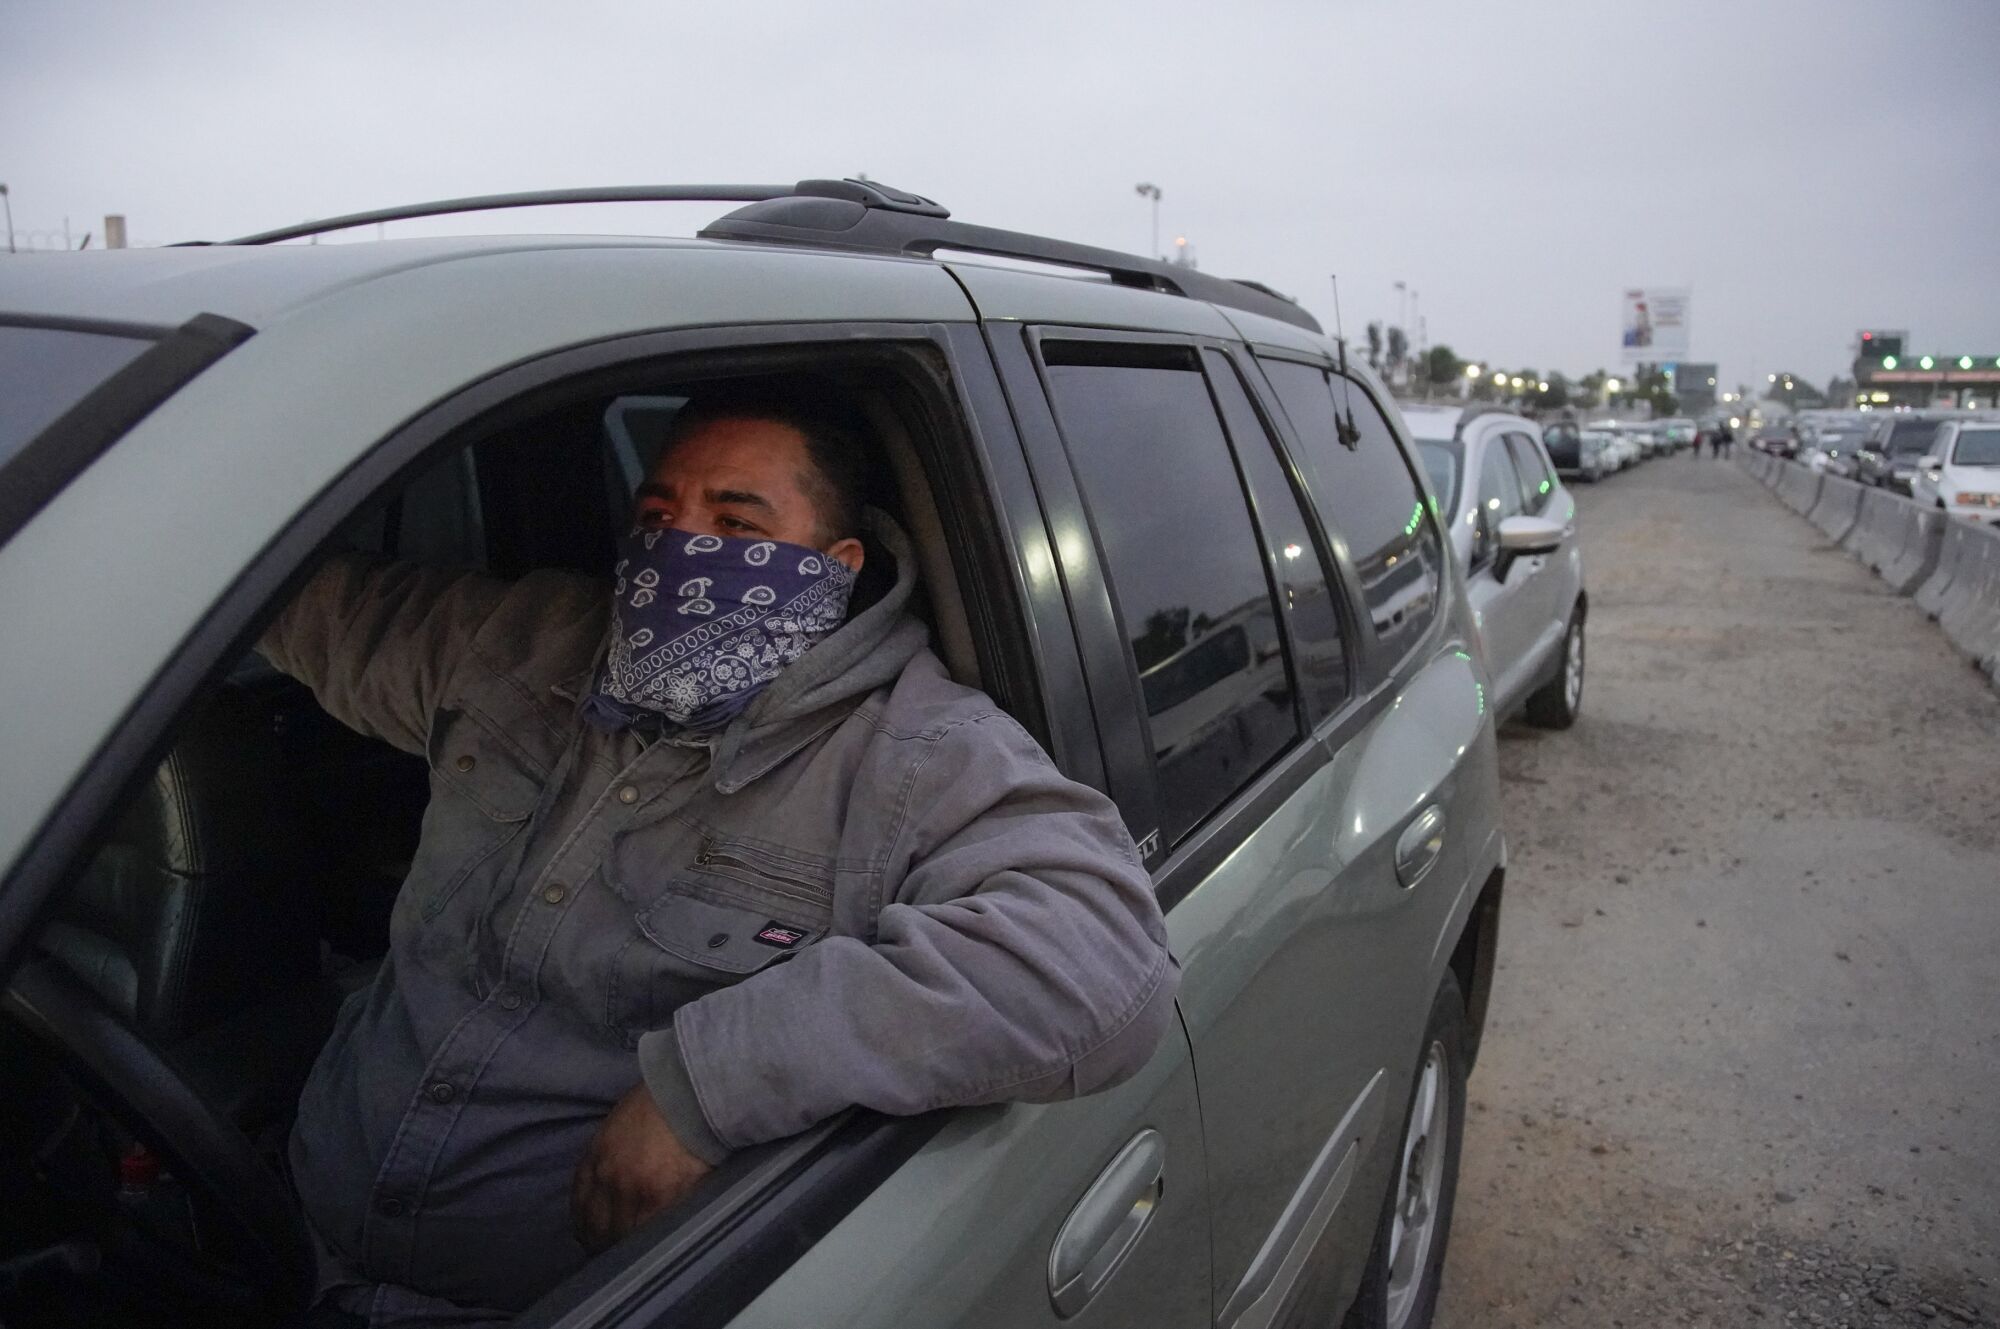 A man wearing a bandanna over his face waits in his car in a long line to cross the border